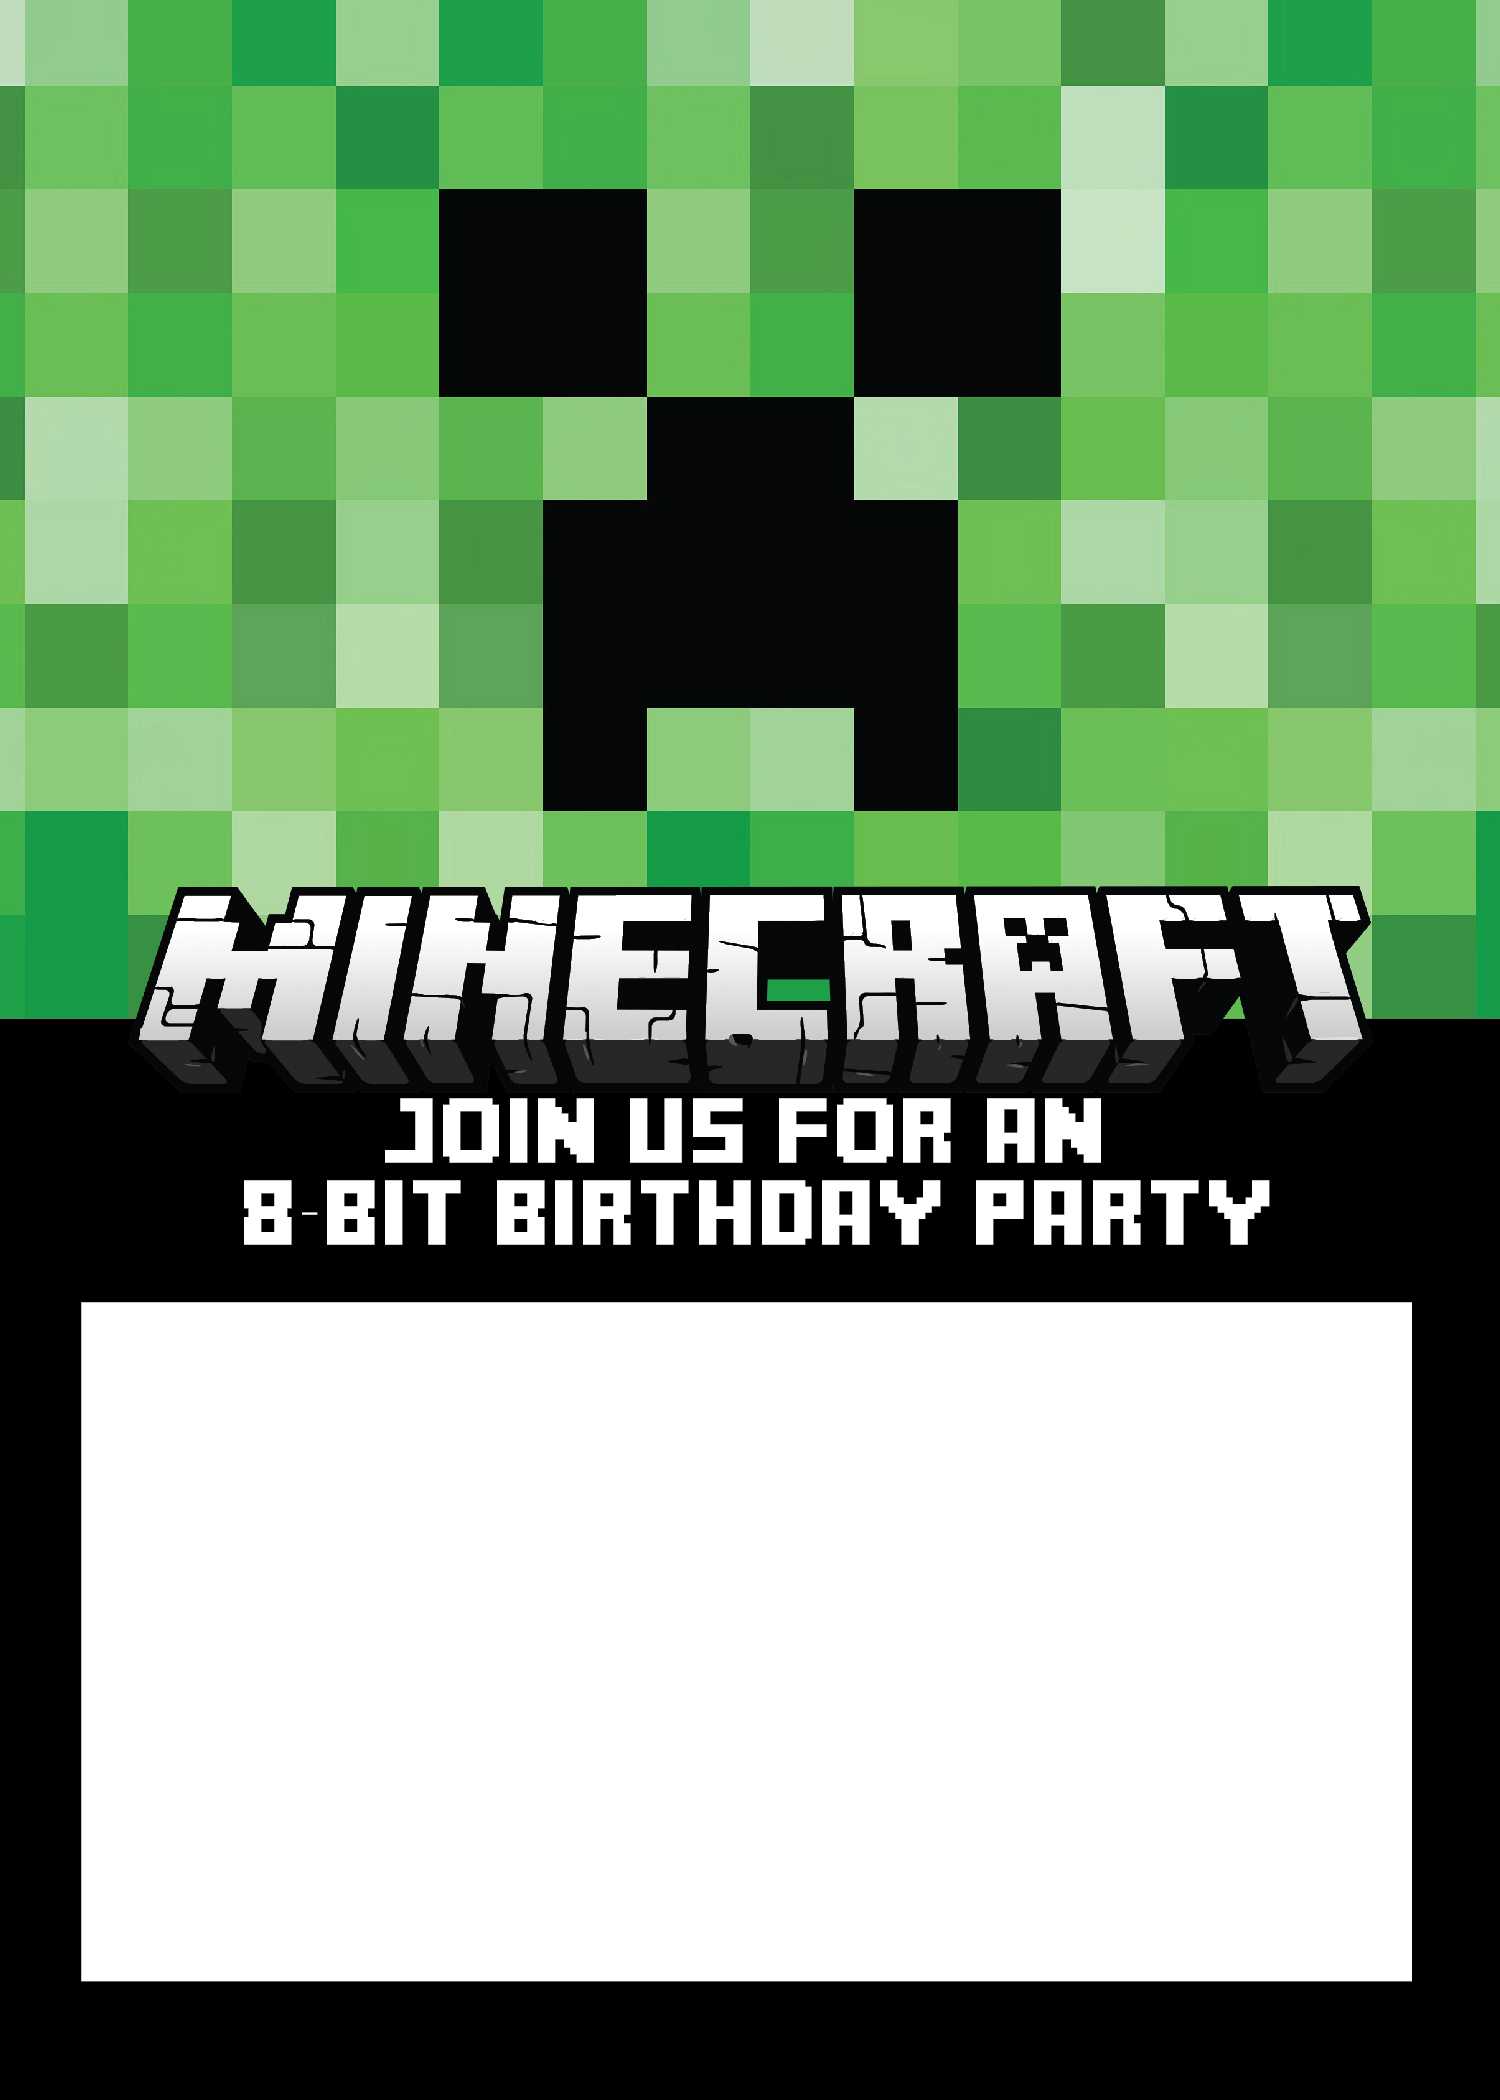 Free Printable Online Invitations Invitation Card Maker Throughout Minecraft Birthday Card Template